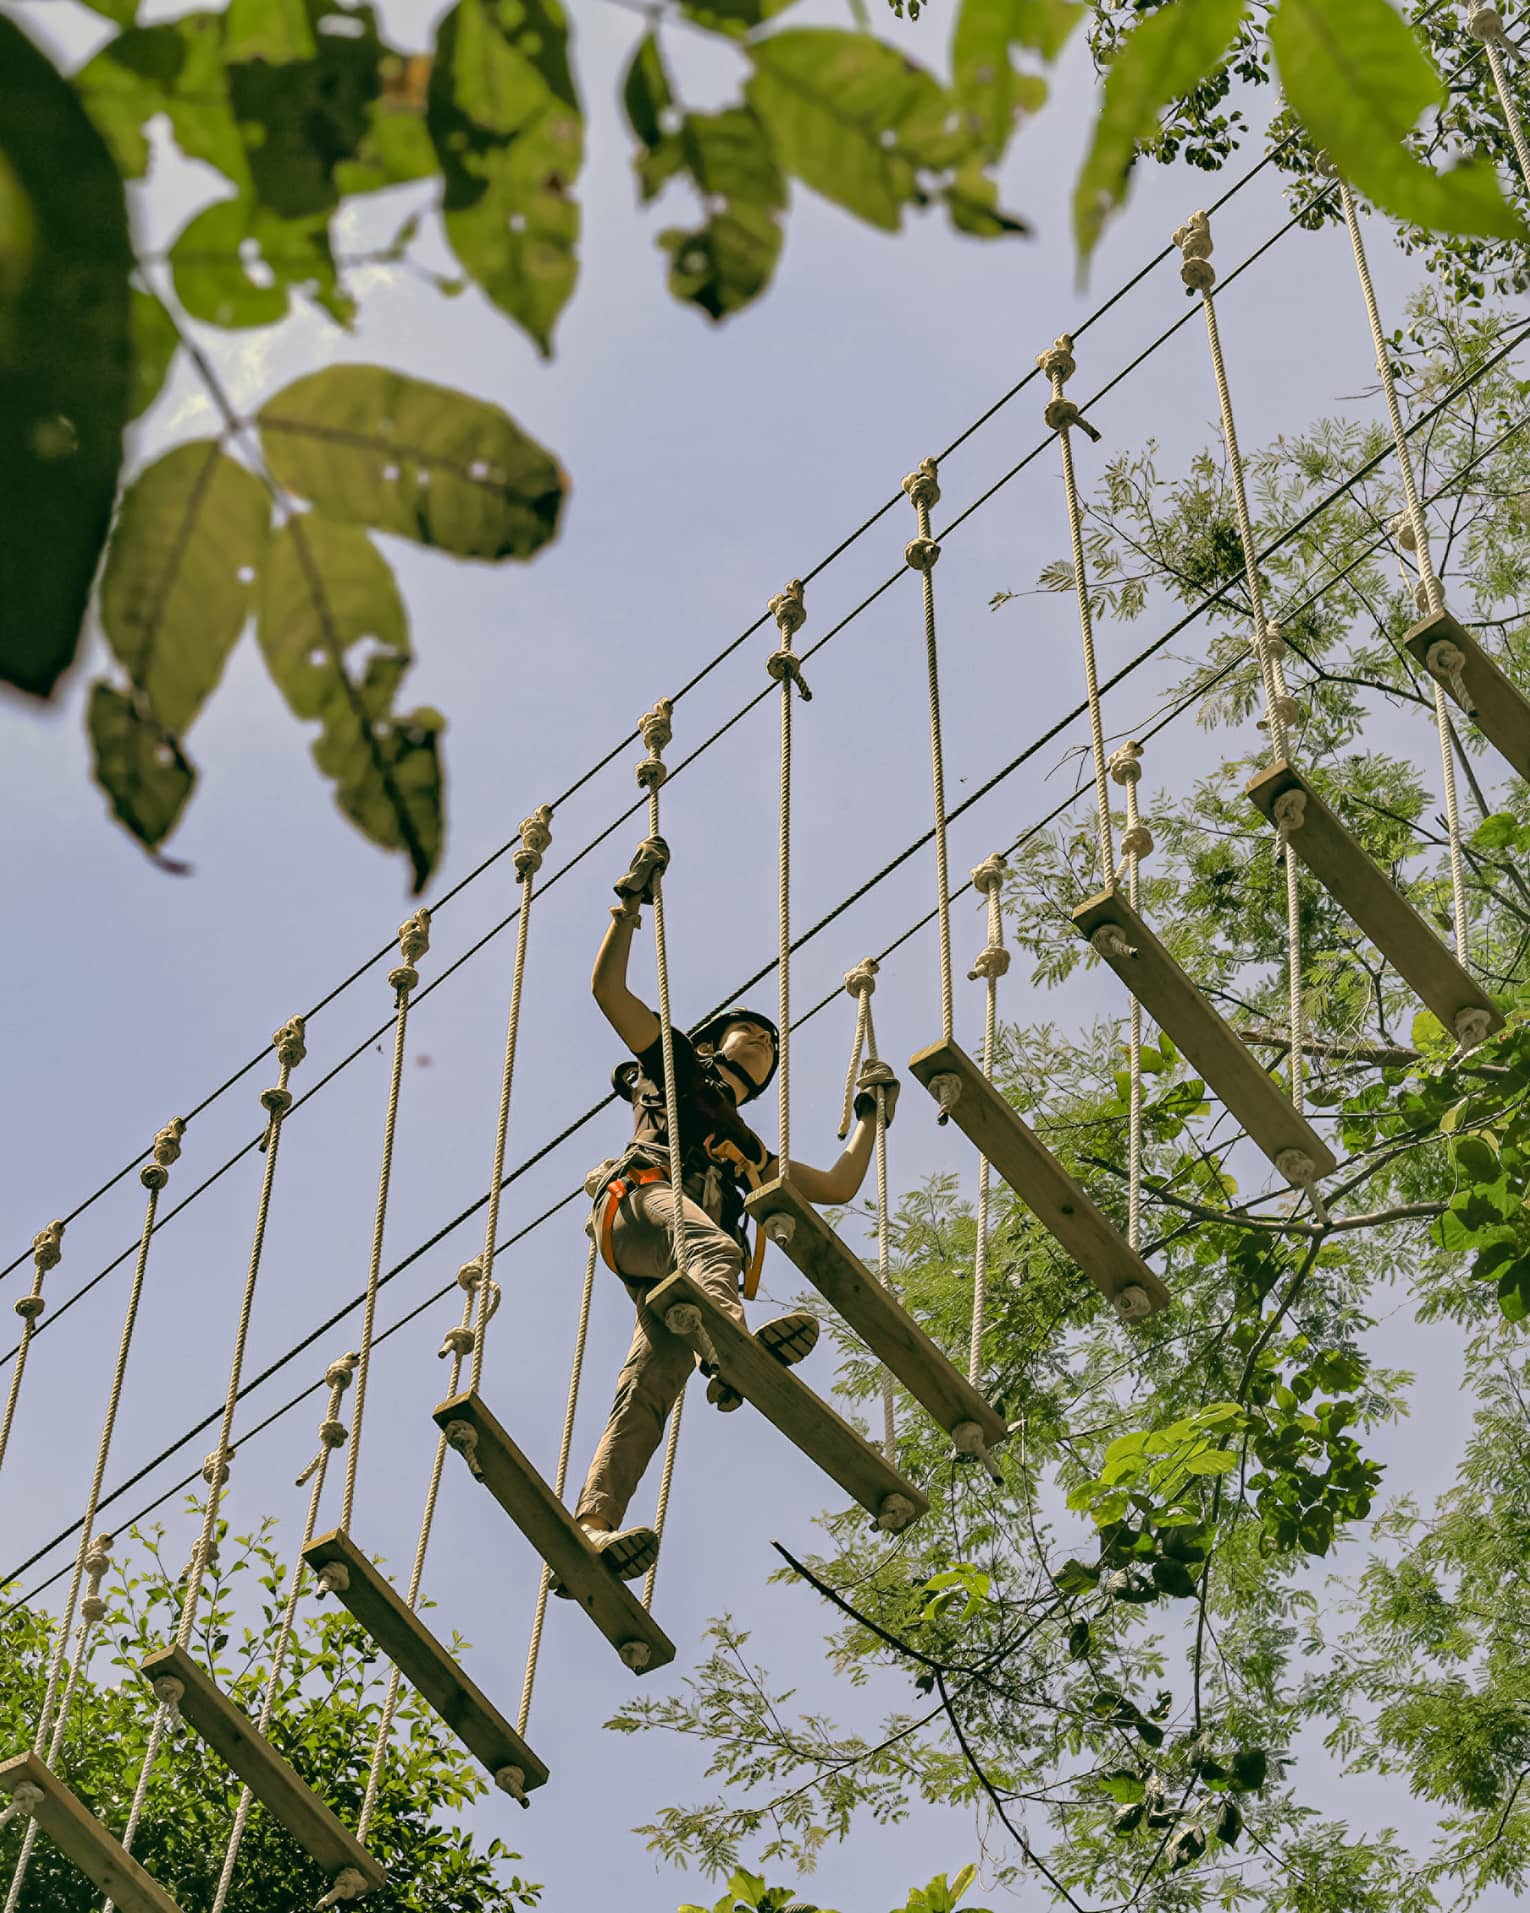 Overhead, a person crosses a bridge of wood planks suspended by ropes high above the forest canopy, surrounded by trees.